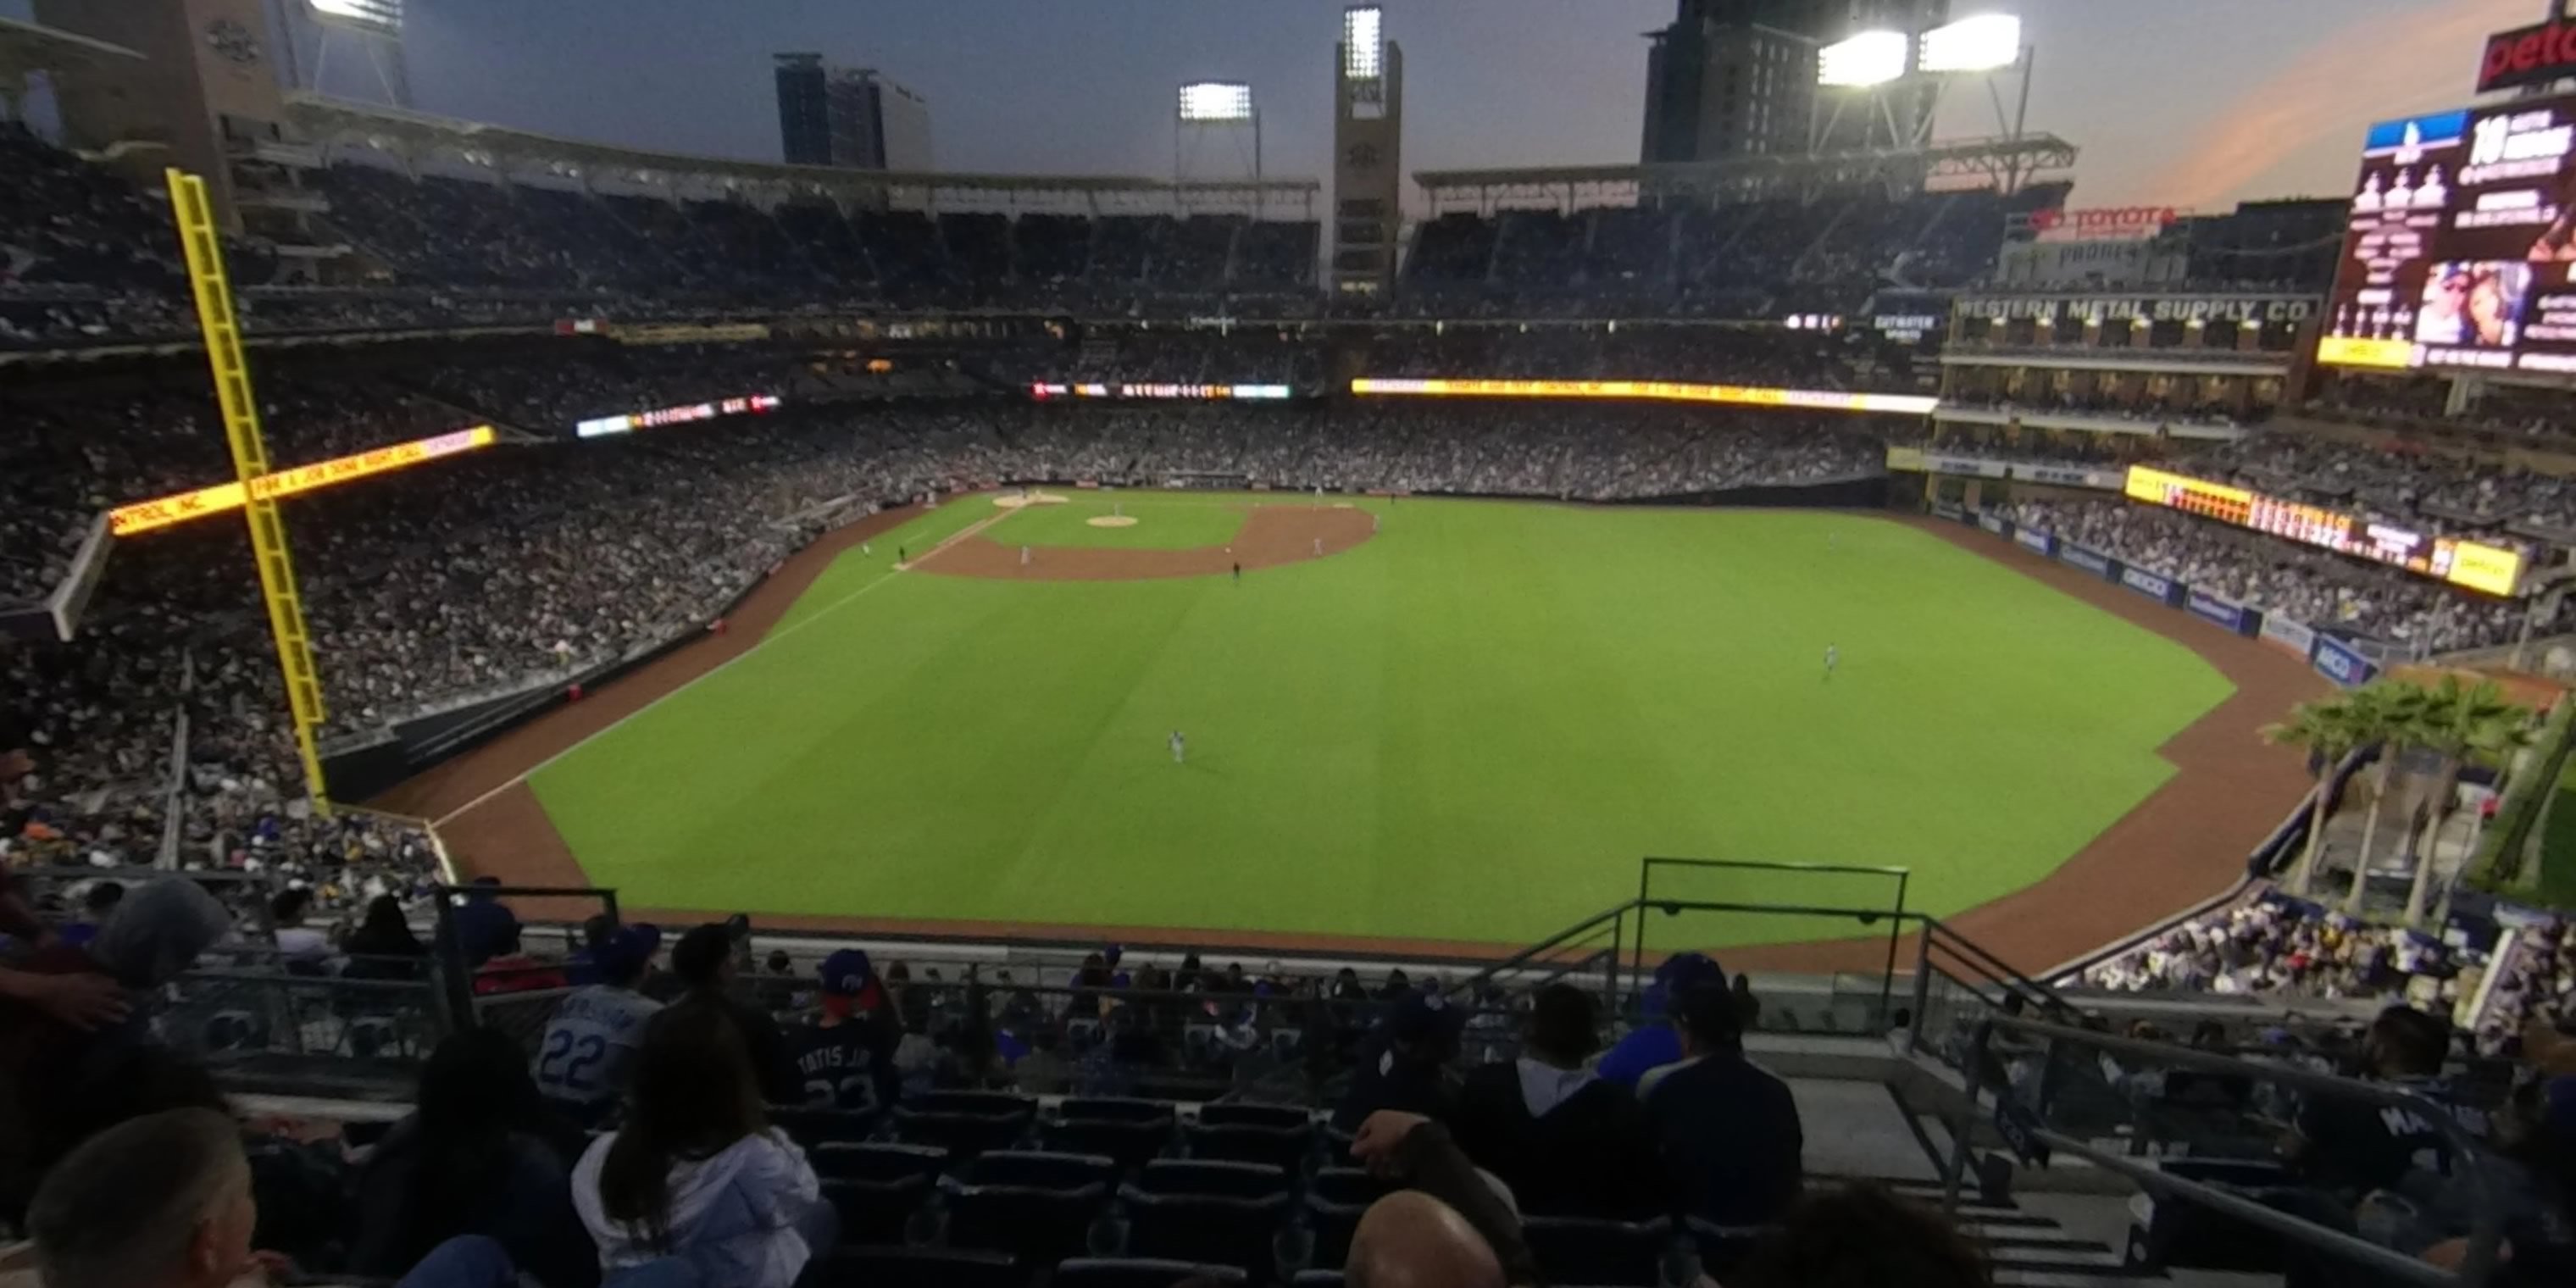 section 235 panoramic seat view  for baseball - petco park